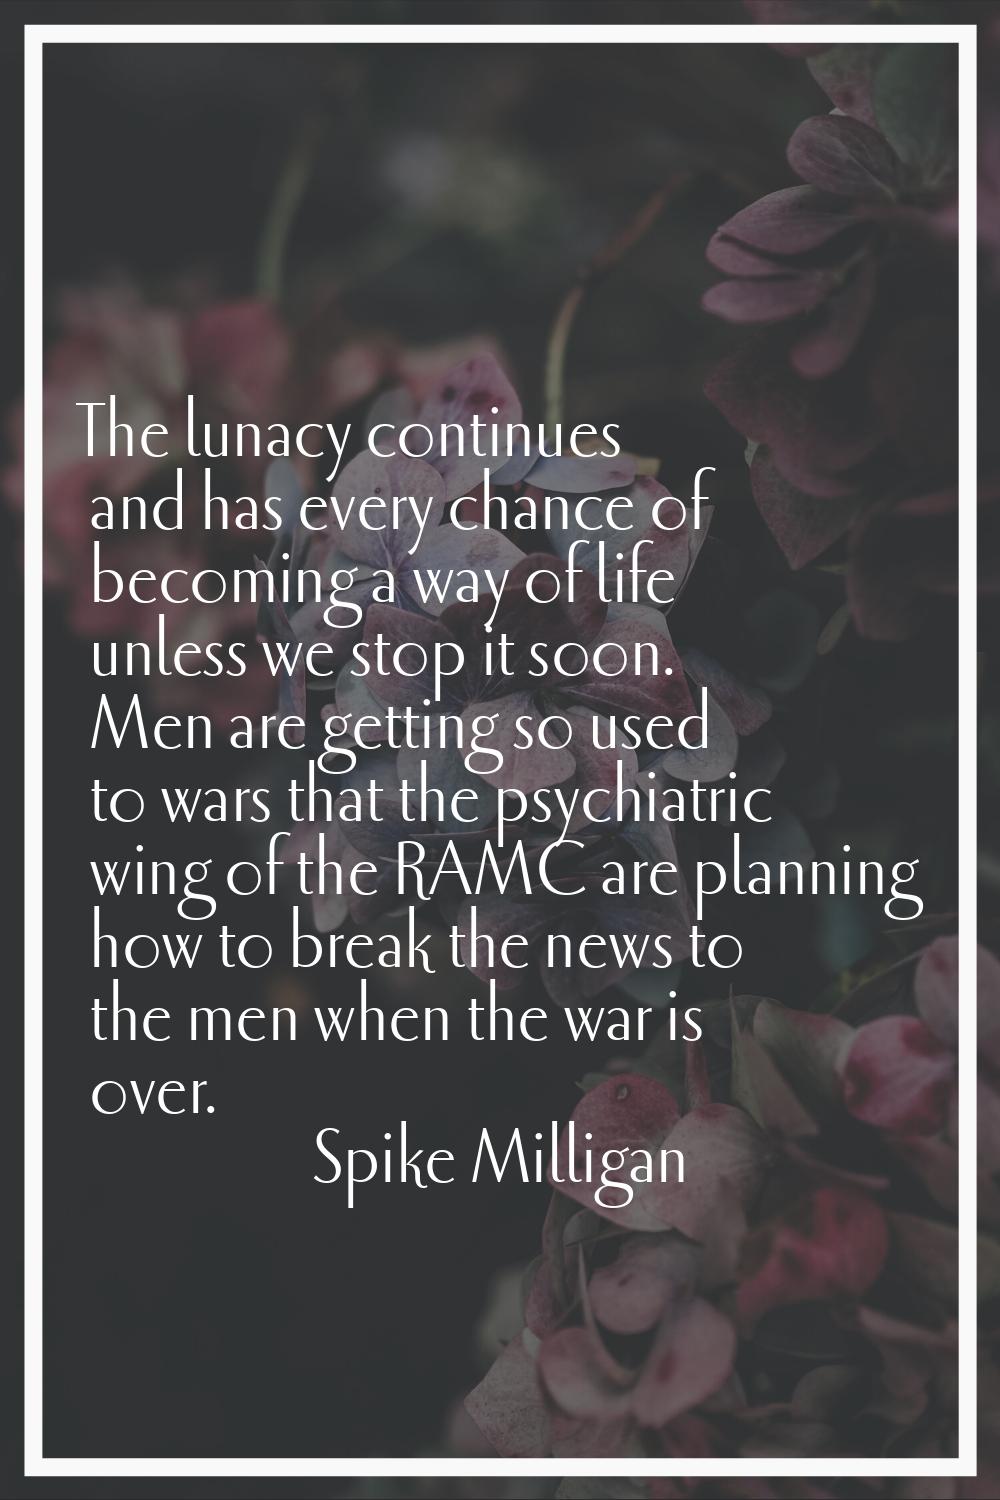 The lunacy continues and has every chance of becoming a way of life unless we stop it soon. Men are